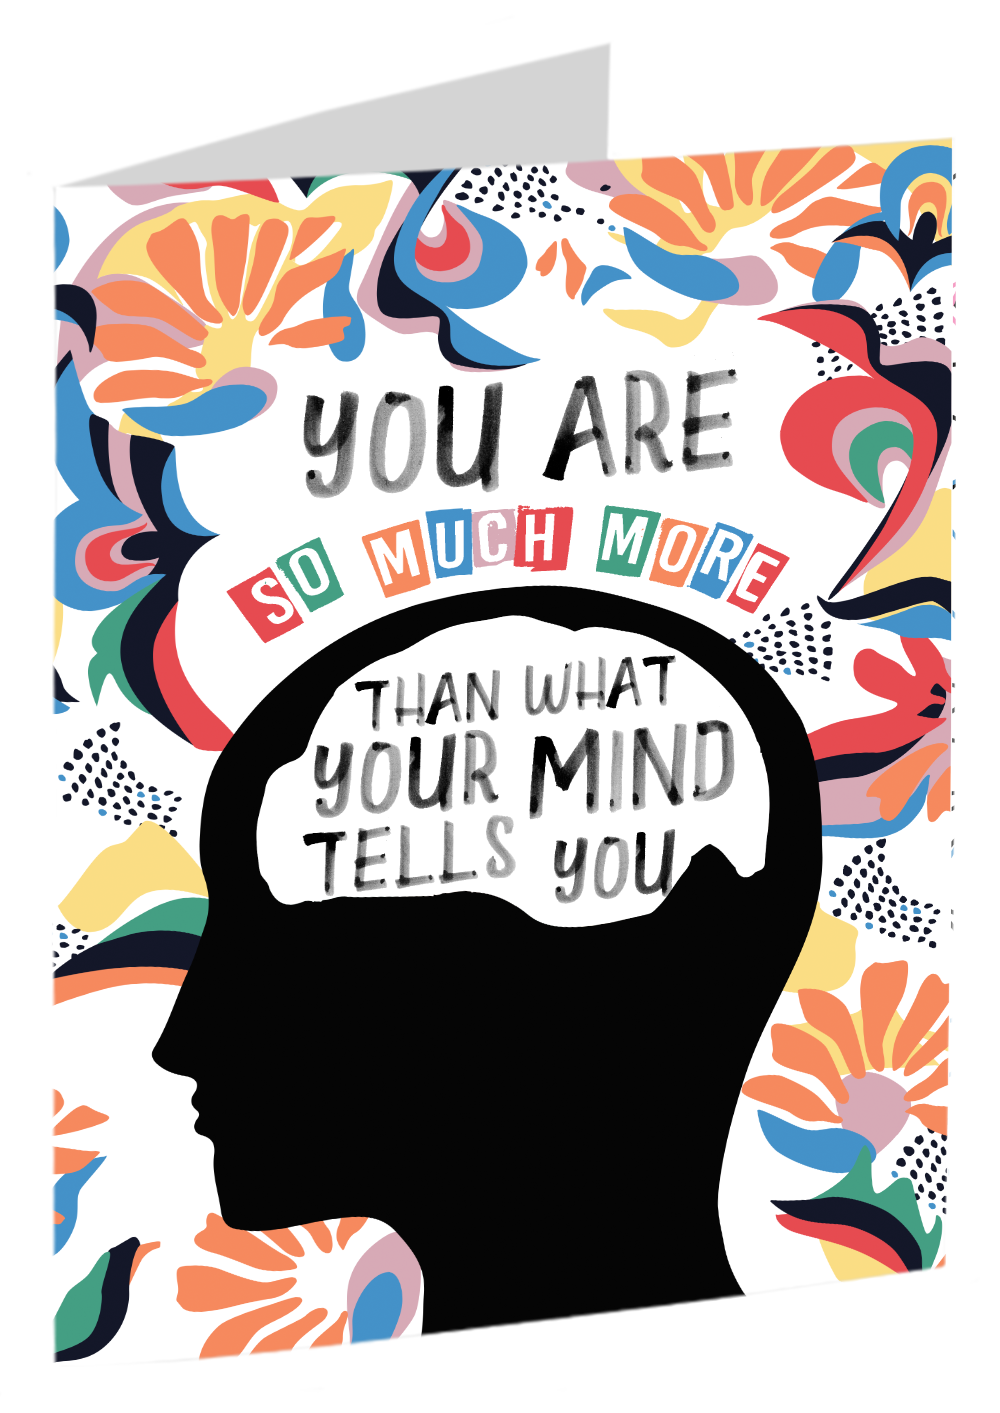 "You Are So Much More Than What Your Mind Tells You" - A Card To Help People With Depression Cope With The Negative Things They Tell Themselves